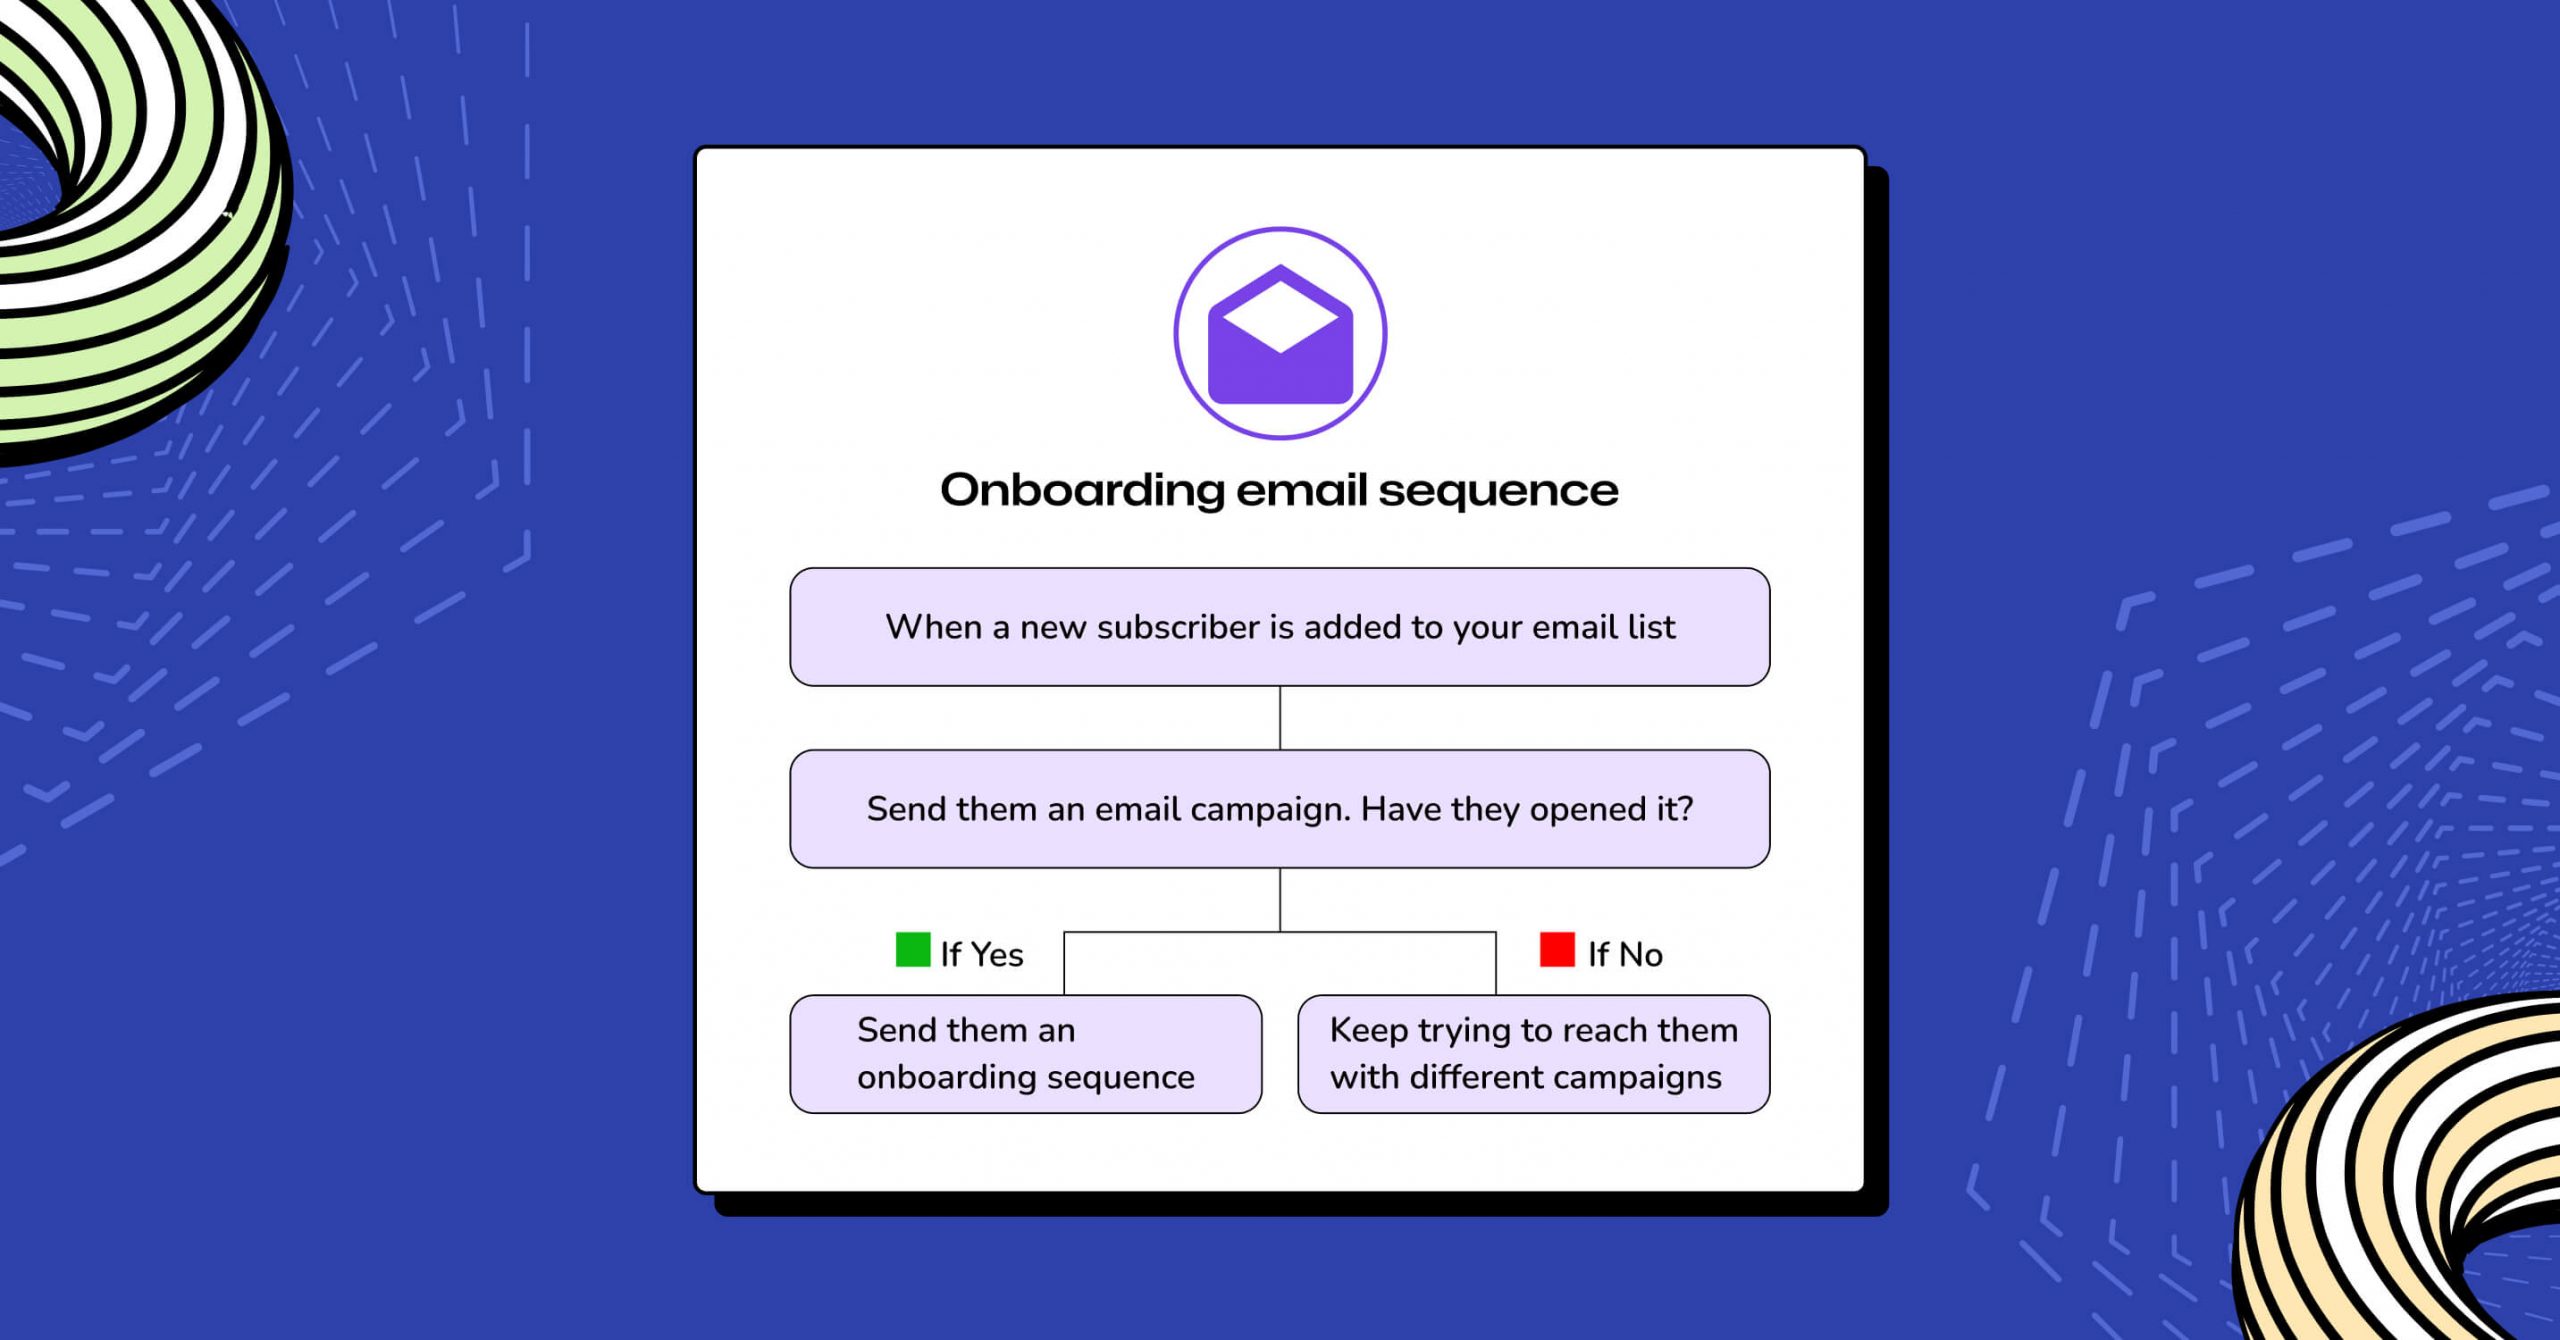 The Art of a Great First Impression: 11 Steps to Creating an Onboarding Email Sequence